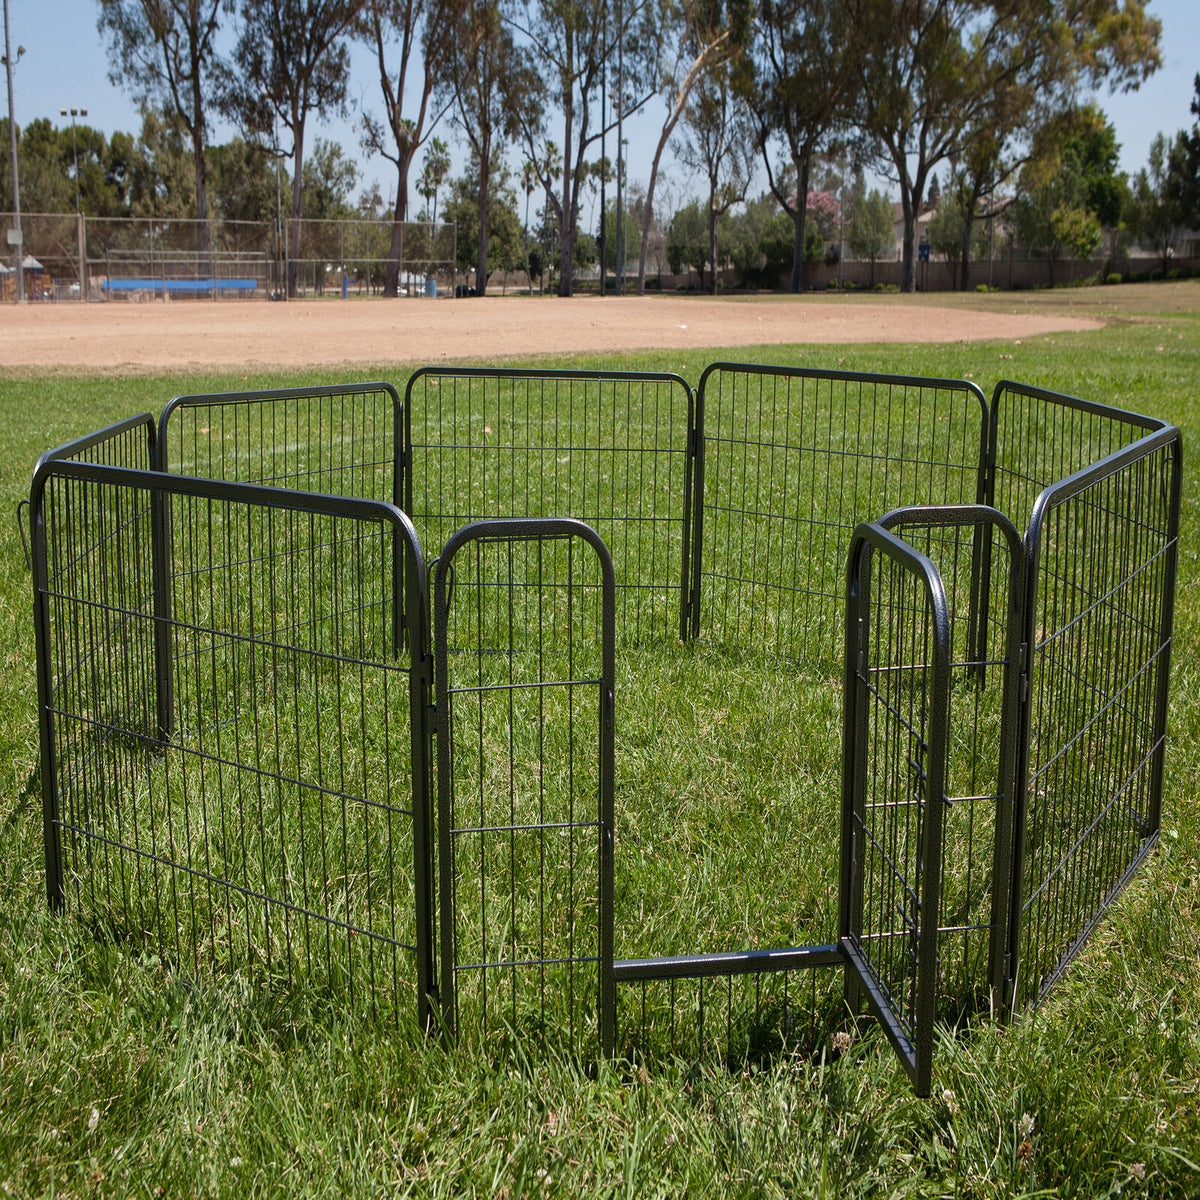 Petsjoy360 Dog Pet Playpen Heavy Duty Metal Exercise Fence and Cage with 8 Panels